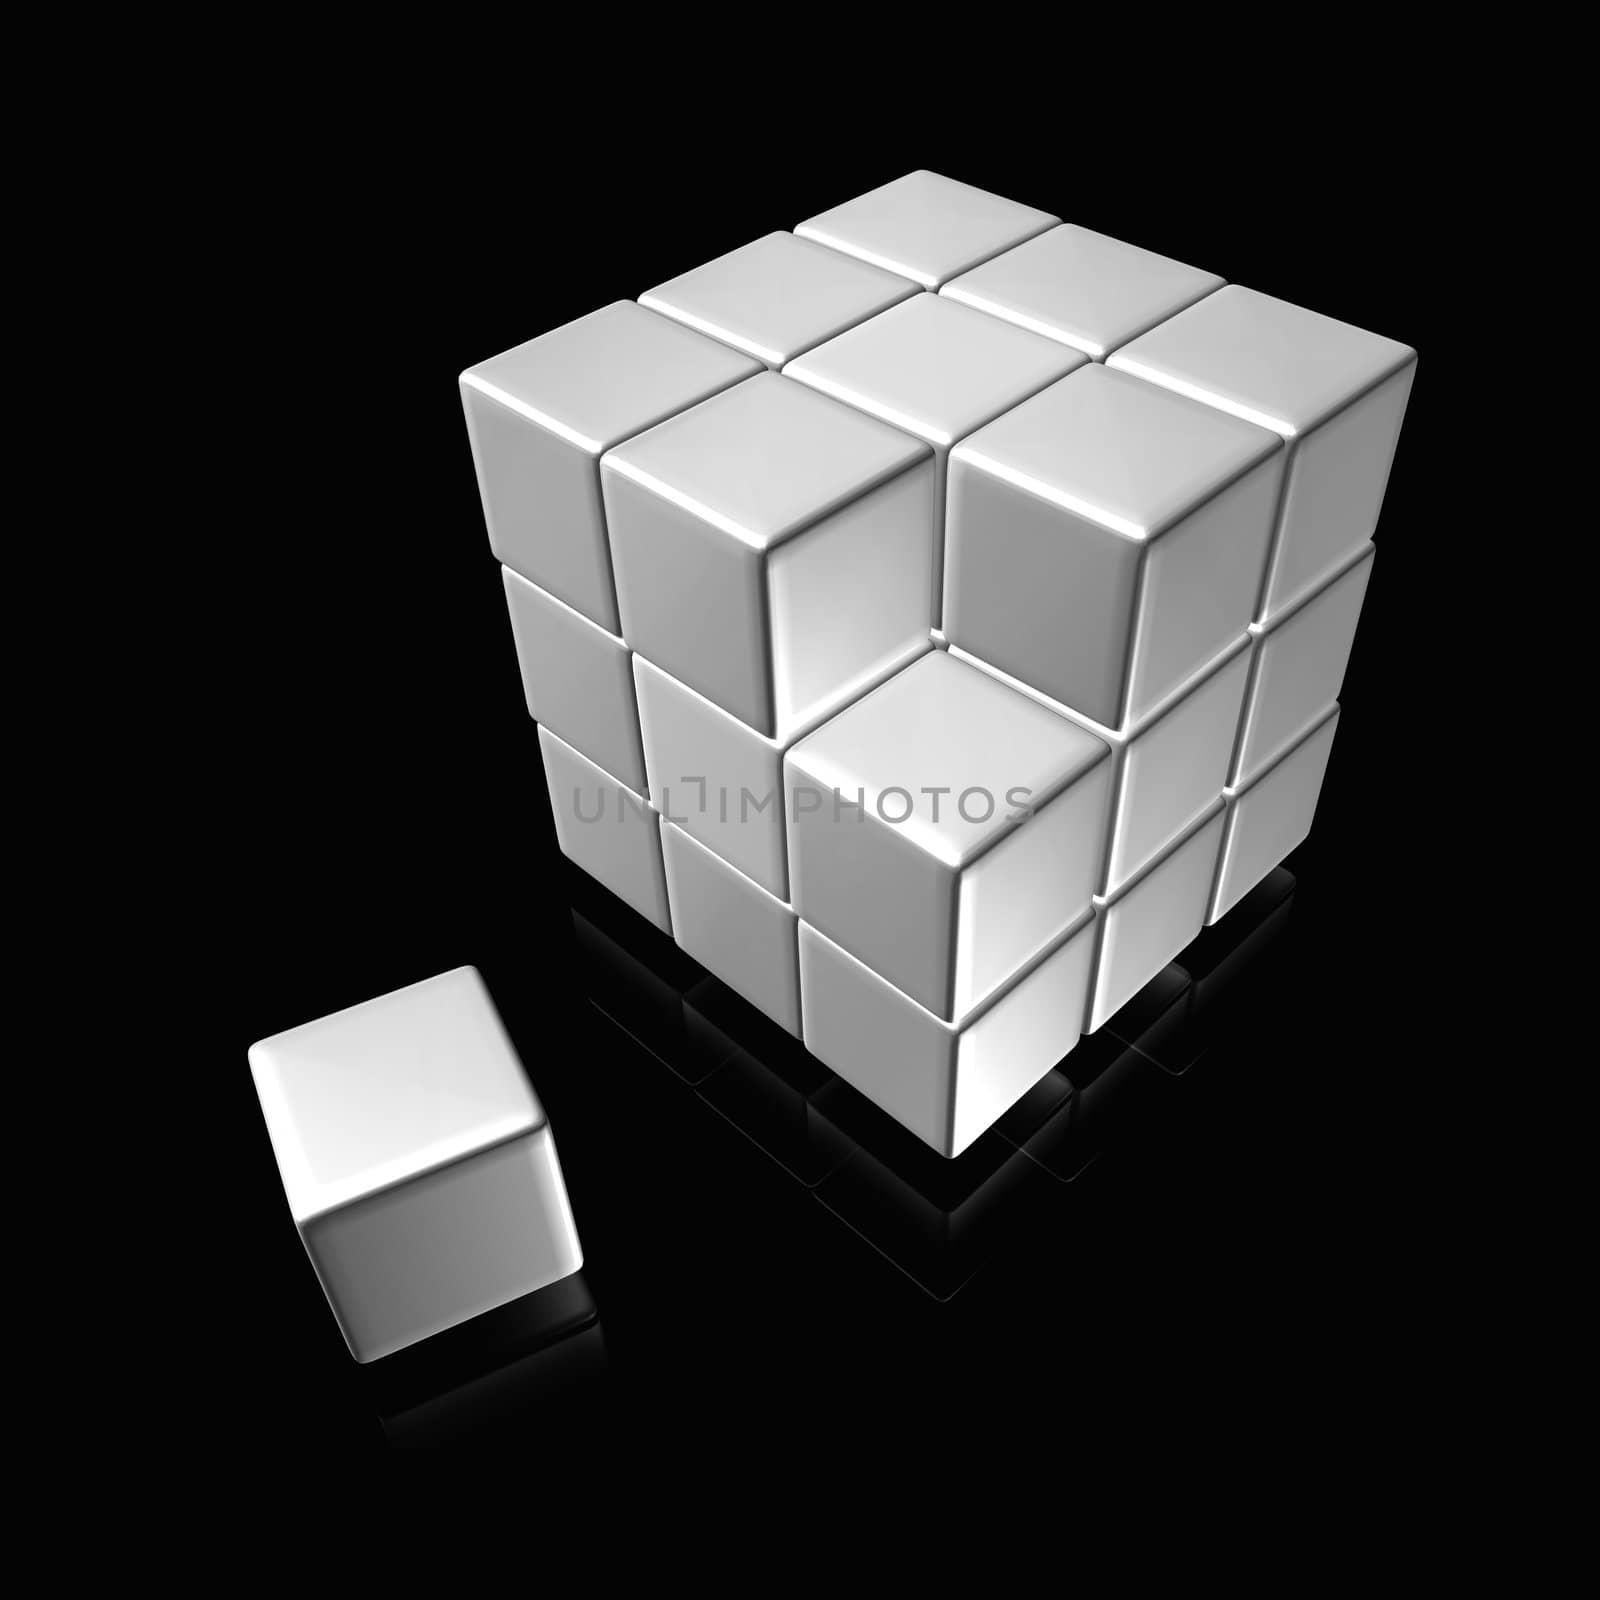 An abstract illustration of cubes on a white background